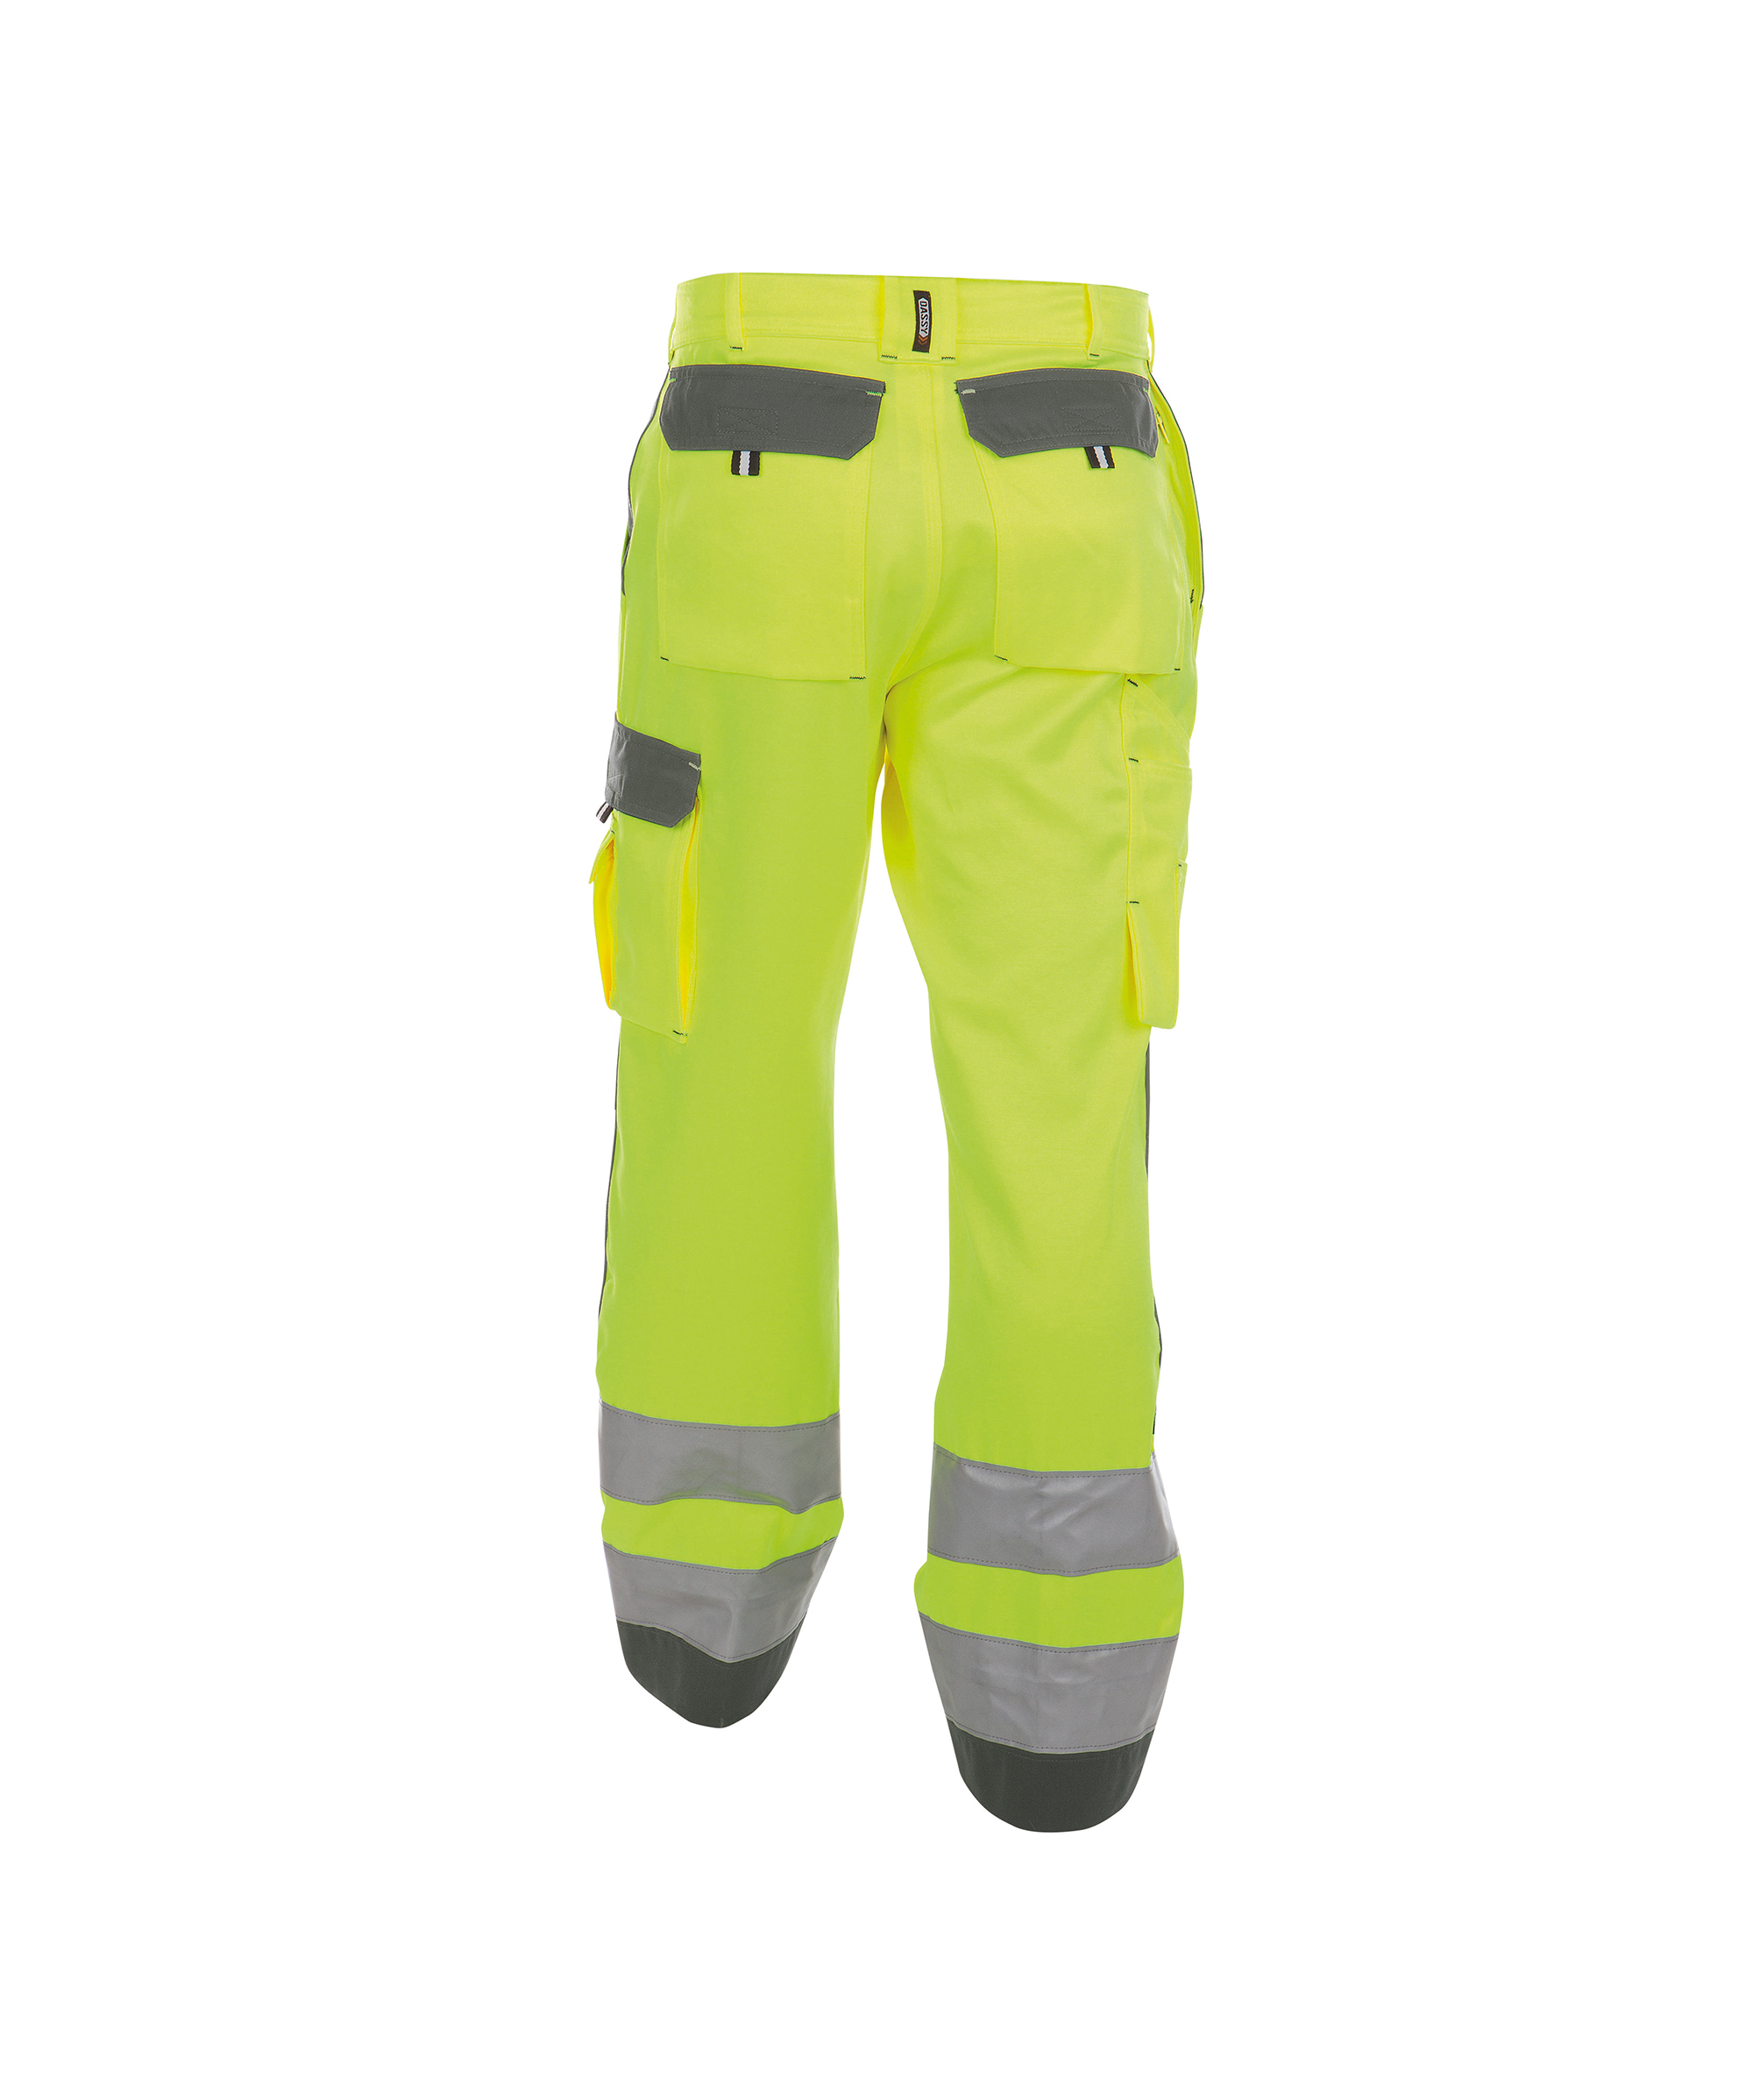 buffalo_high-visibility-work-trousers-with-knee-pockets_fluo-yellow-cement-grey_back.jpg